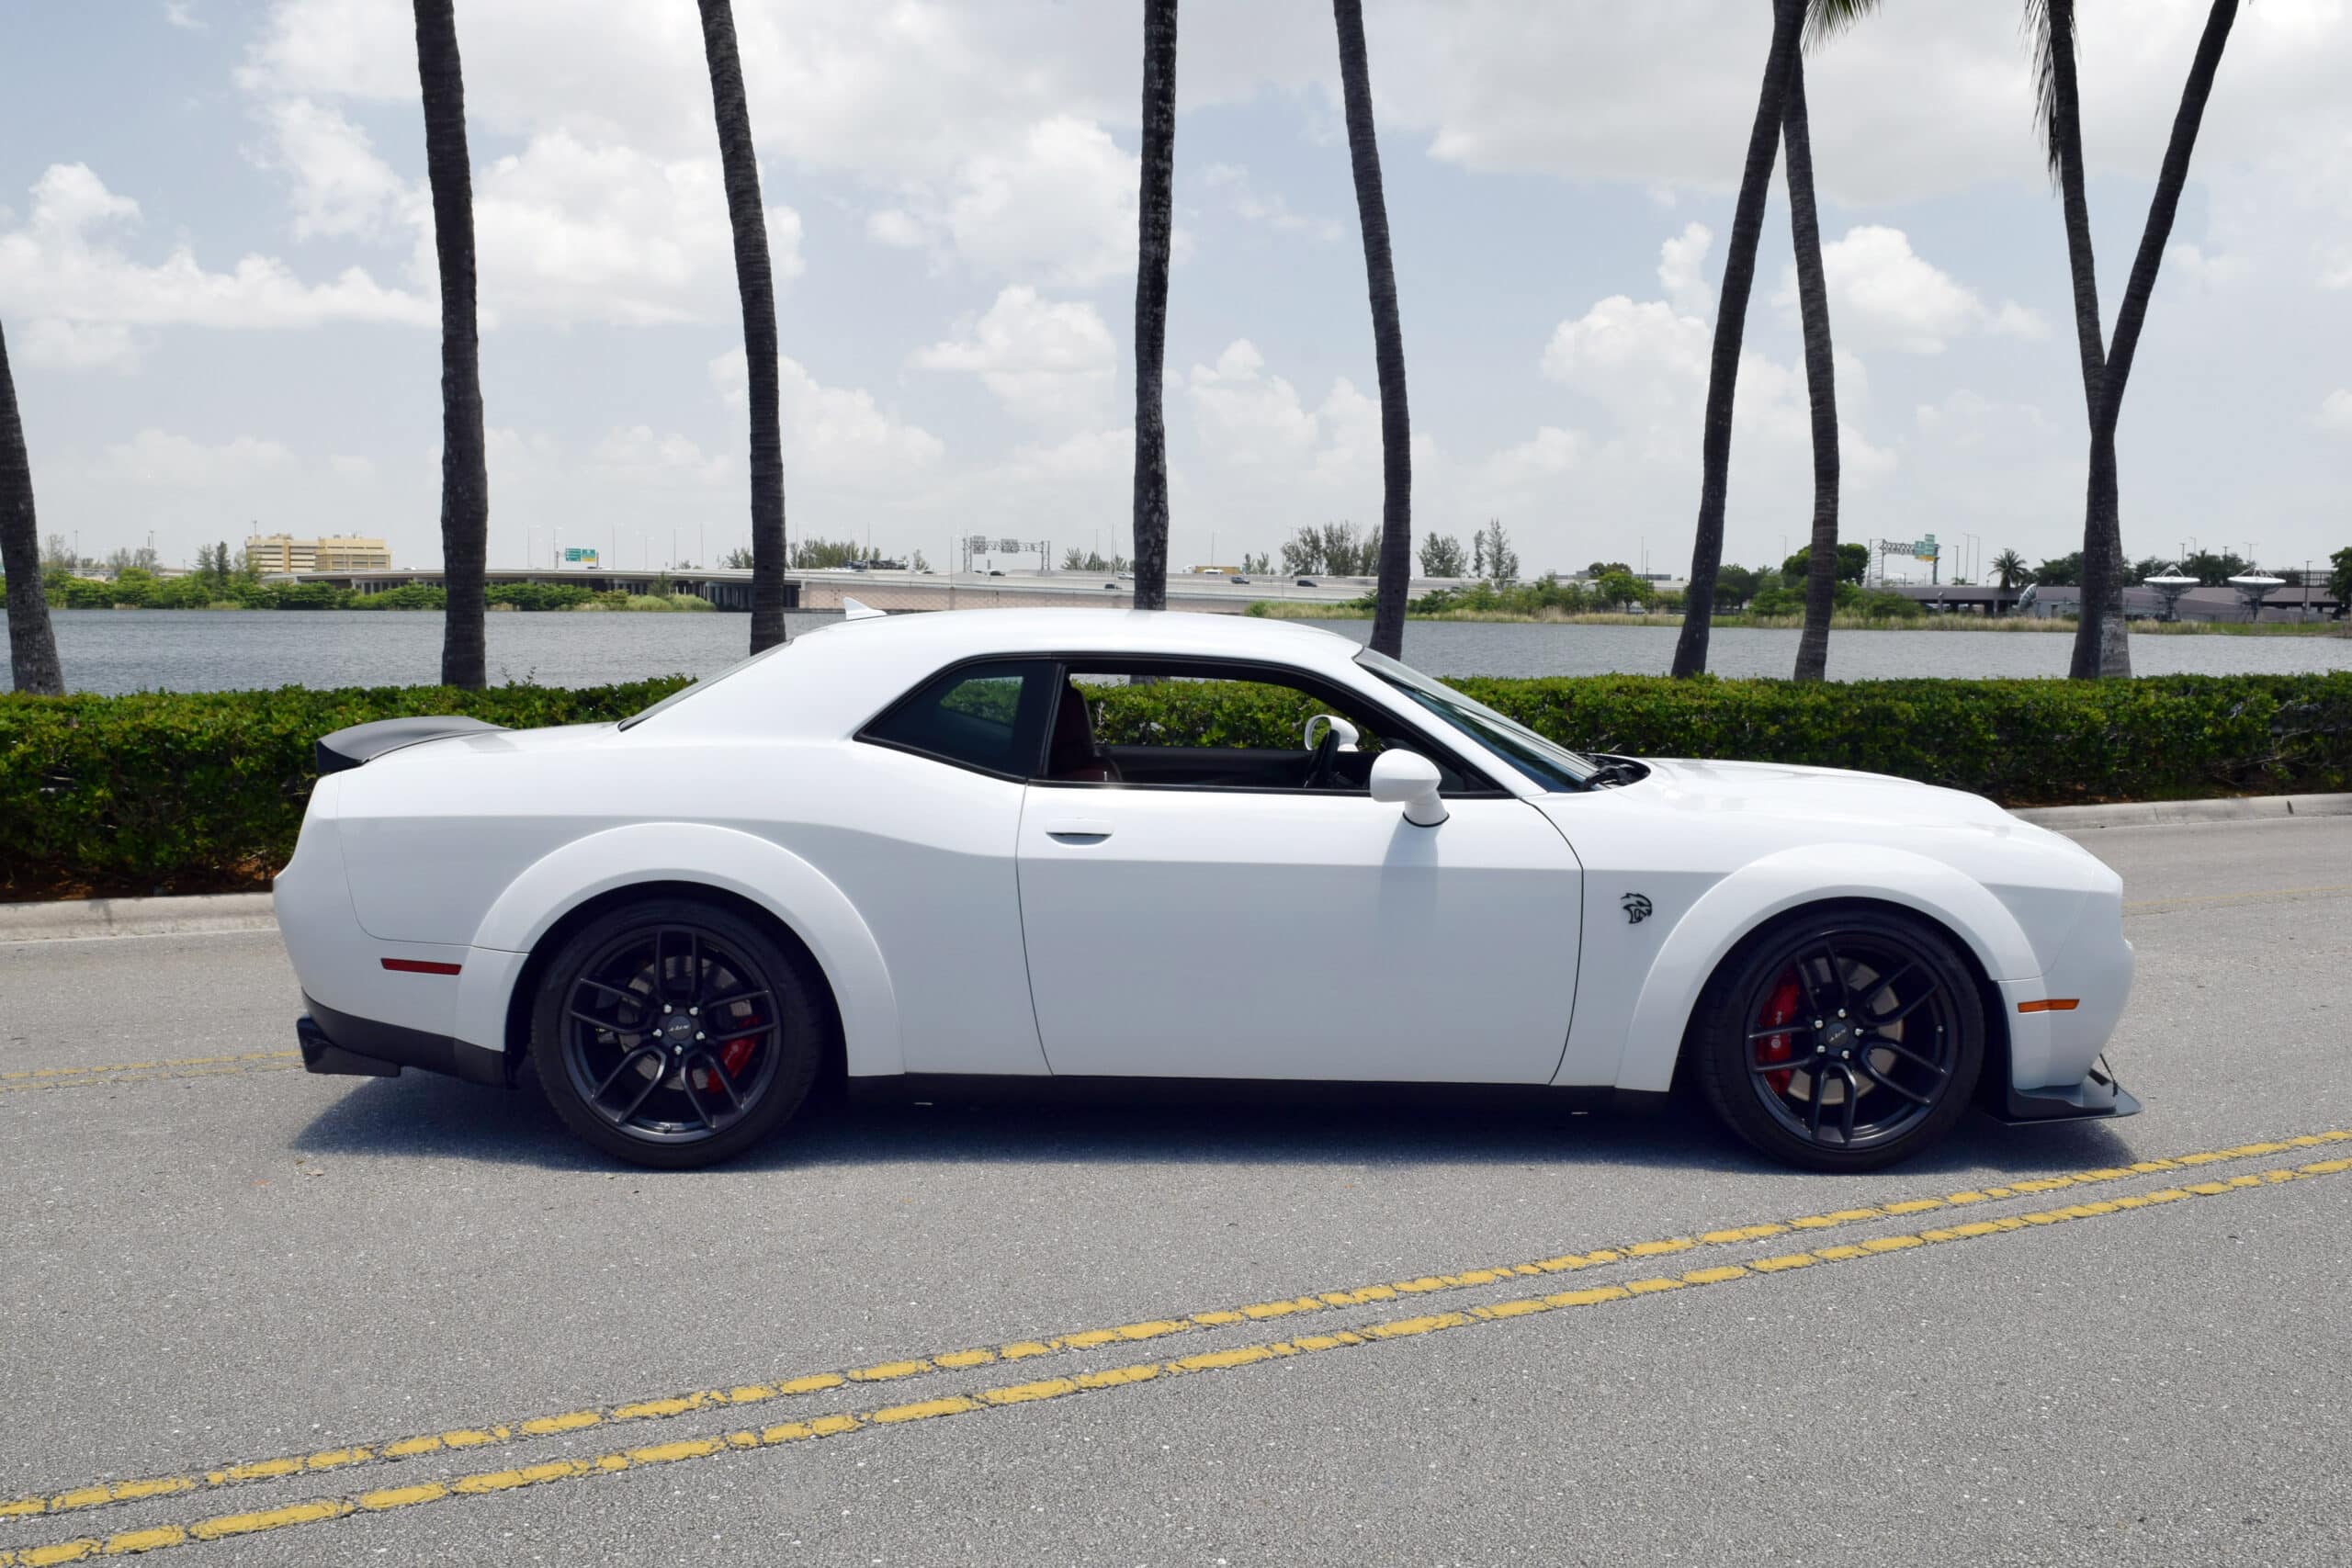 2019 Dodge Challenger Hellcat Redeye   766 miles, One owner, Wide Body, Loaded with options, Original Window Sticker and Factory Warranty